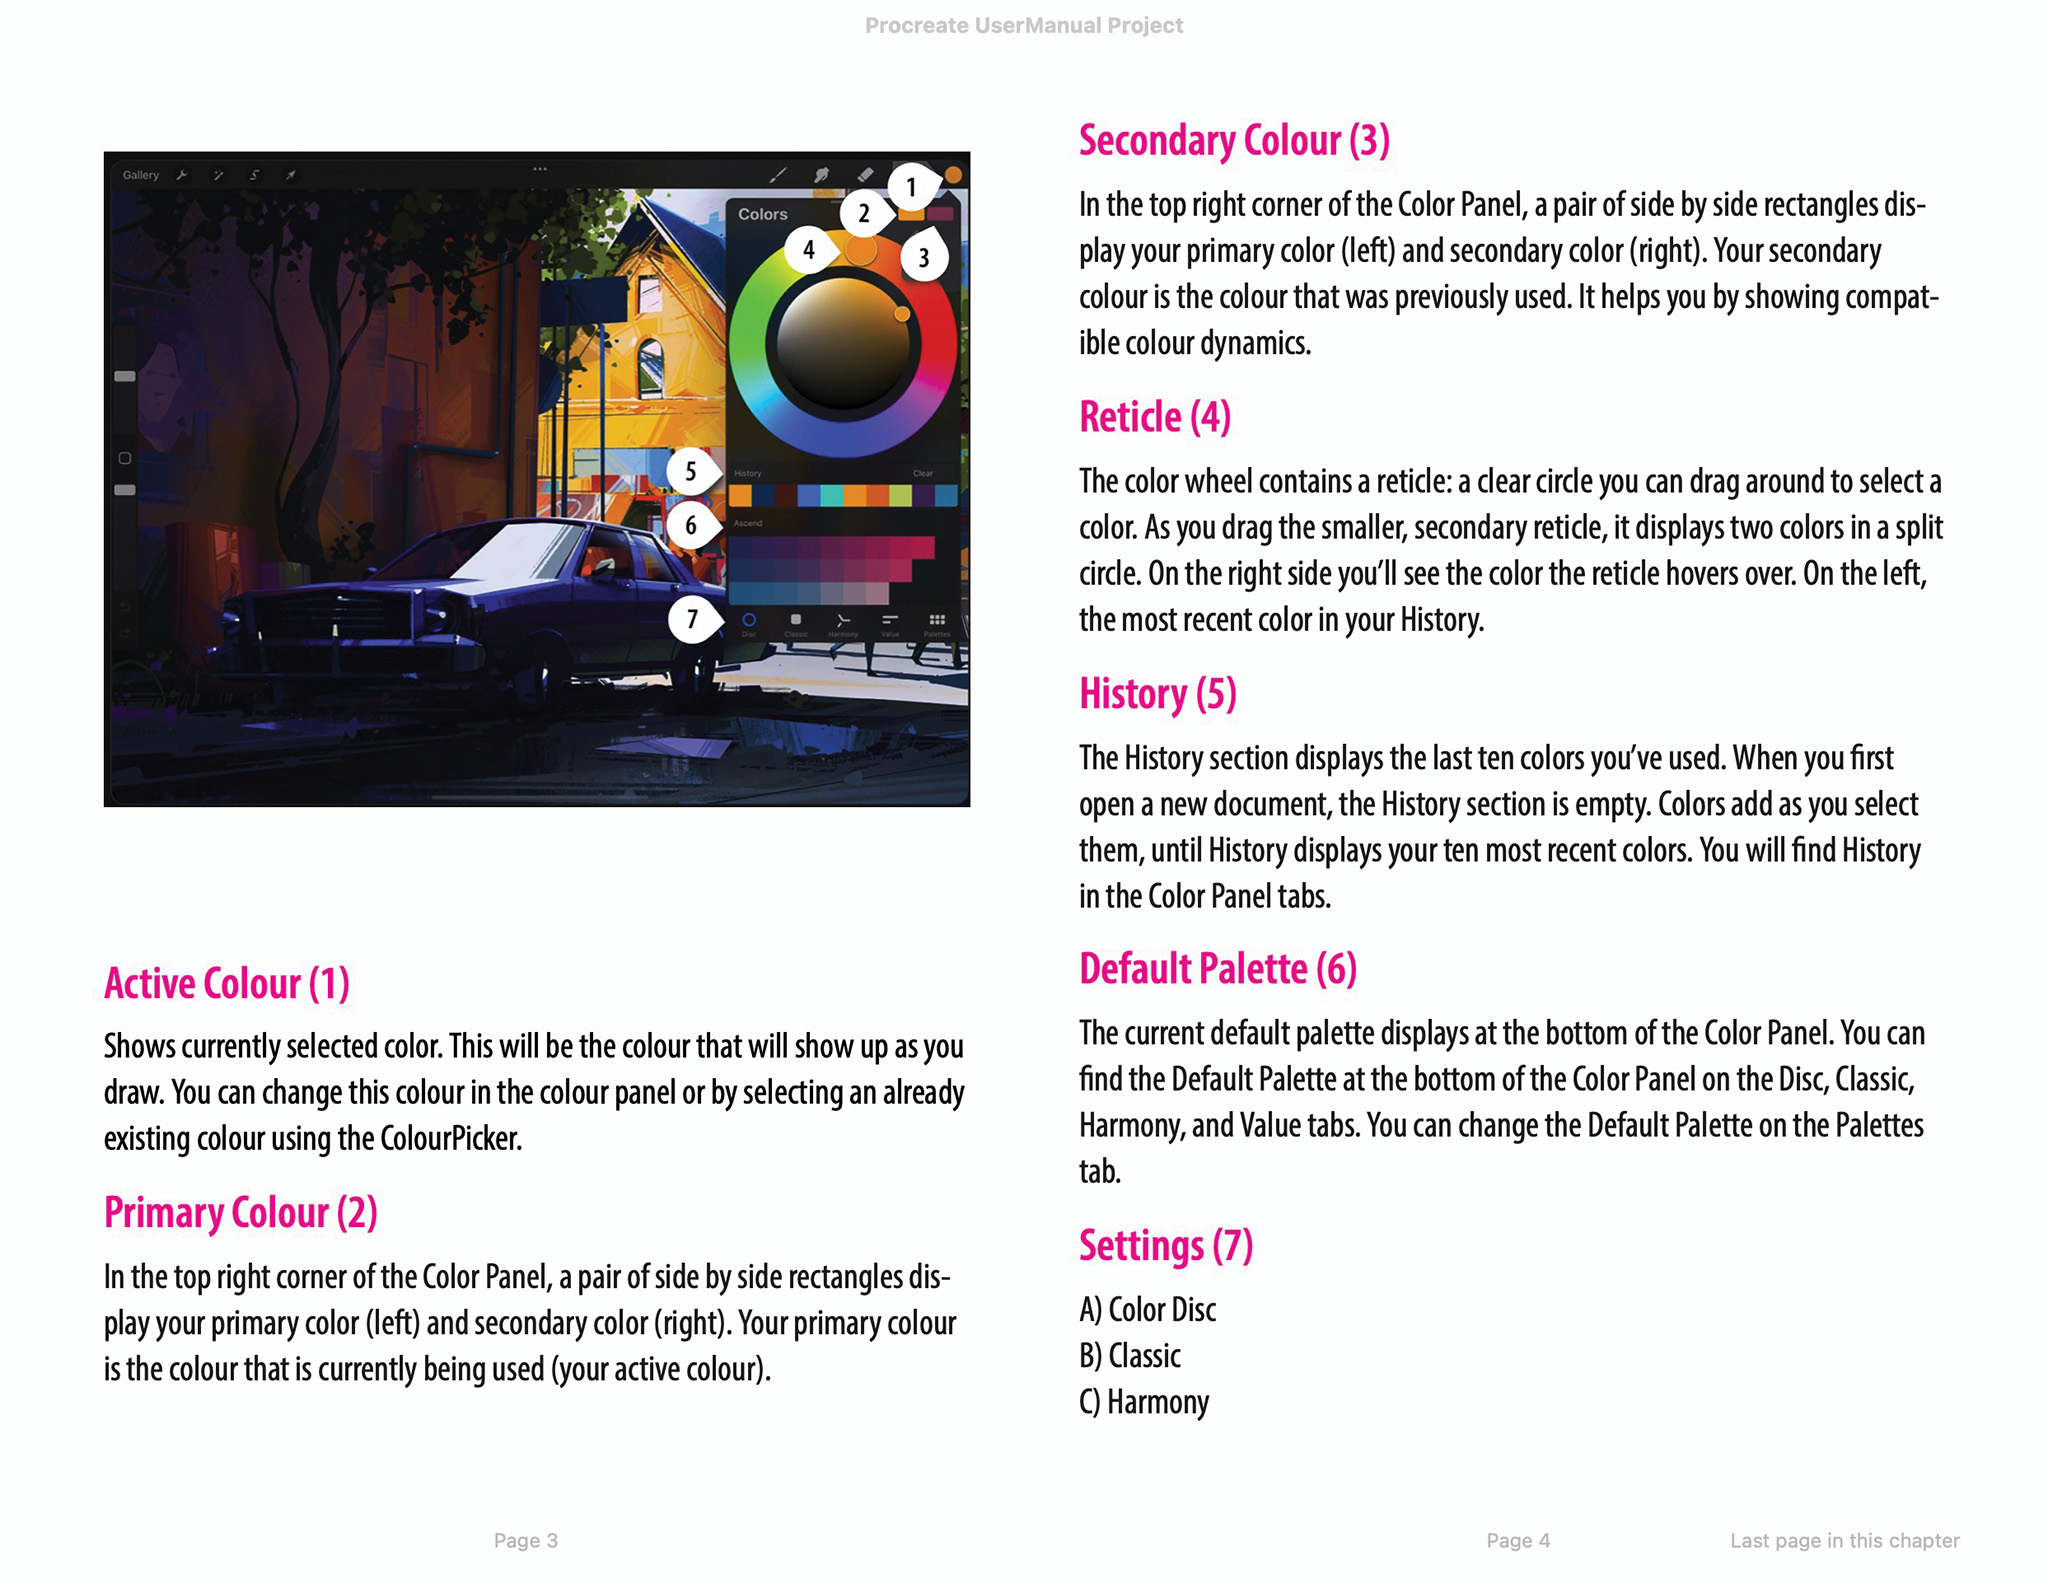 This is a spread from the ebook version of the procreate instruction manual.